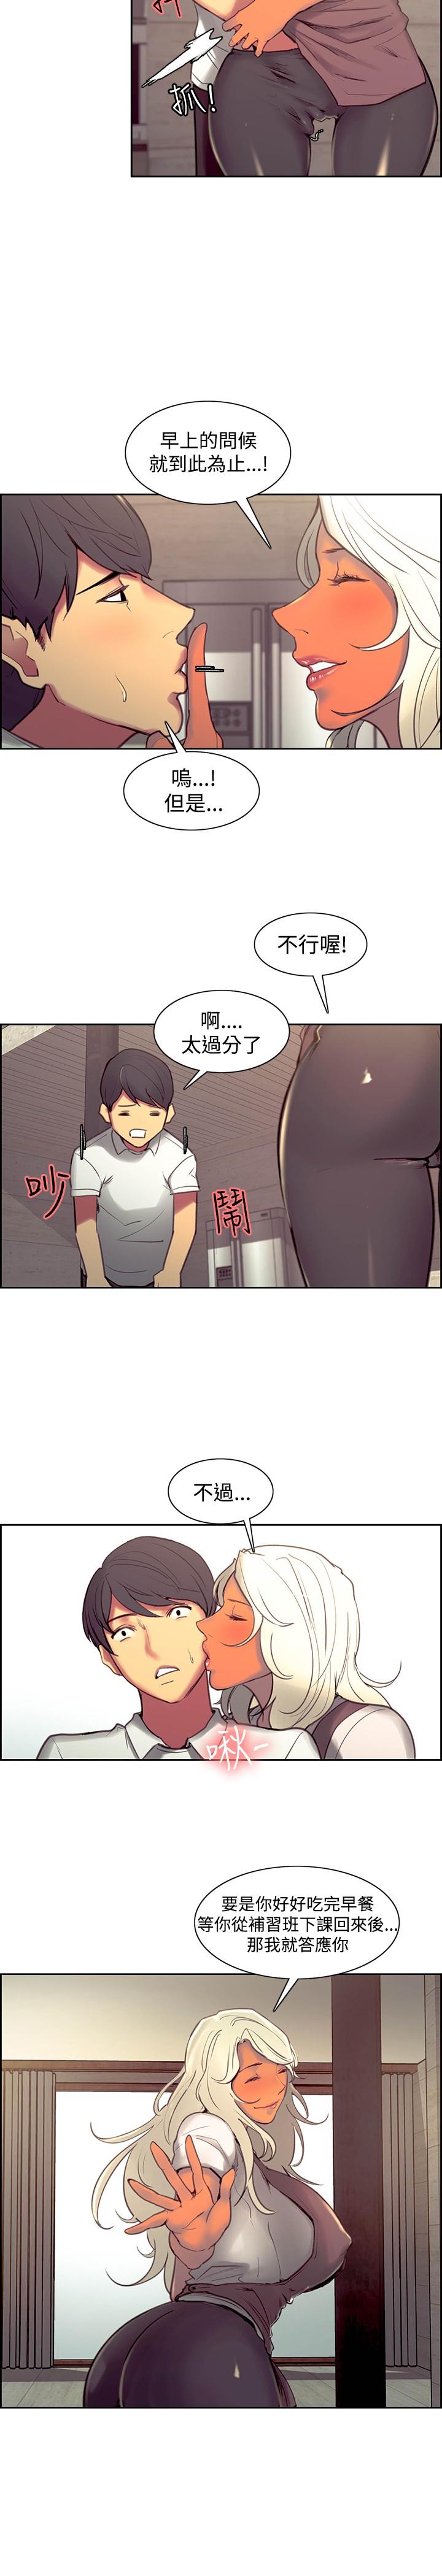 [Serious] Domesticate the Housekeeper 调教家政妇 Ch.29~44END [Chinese]中文 259